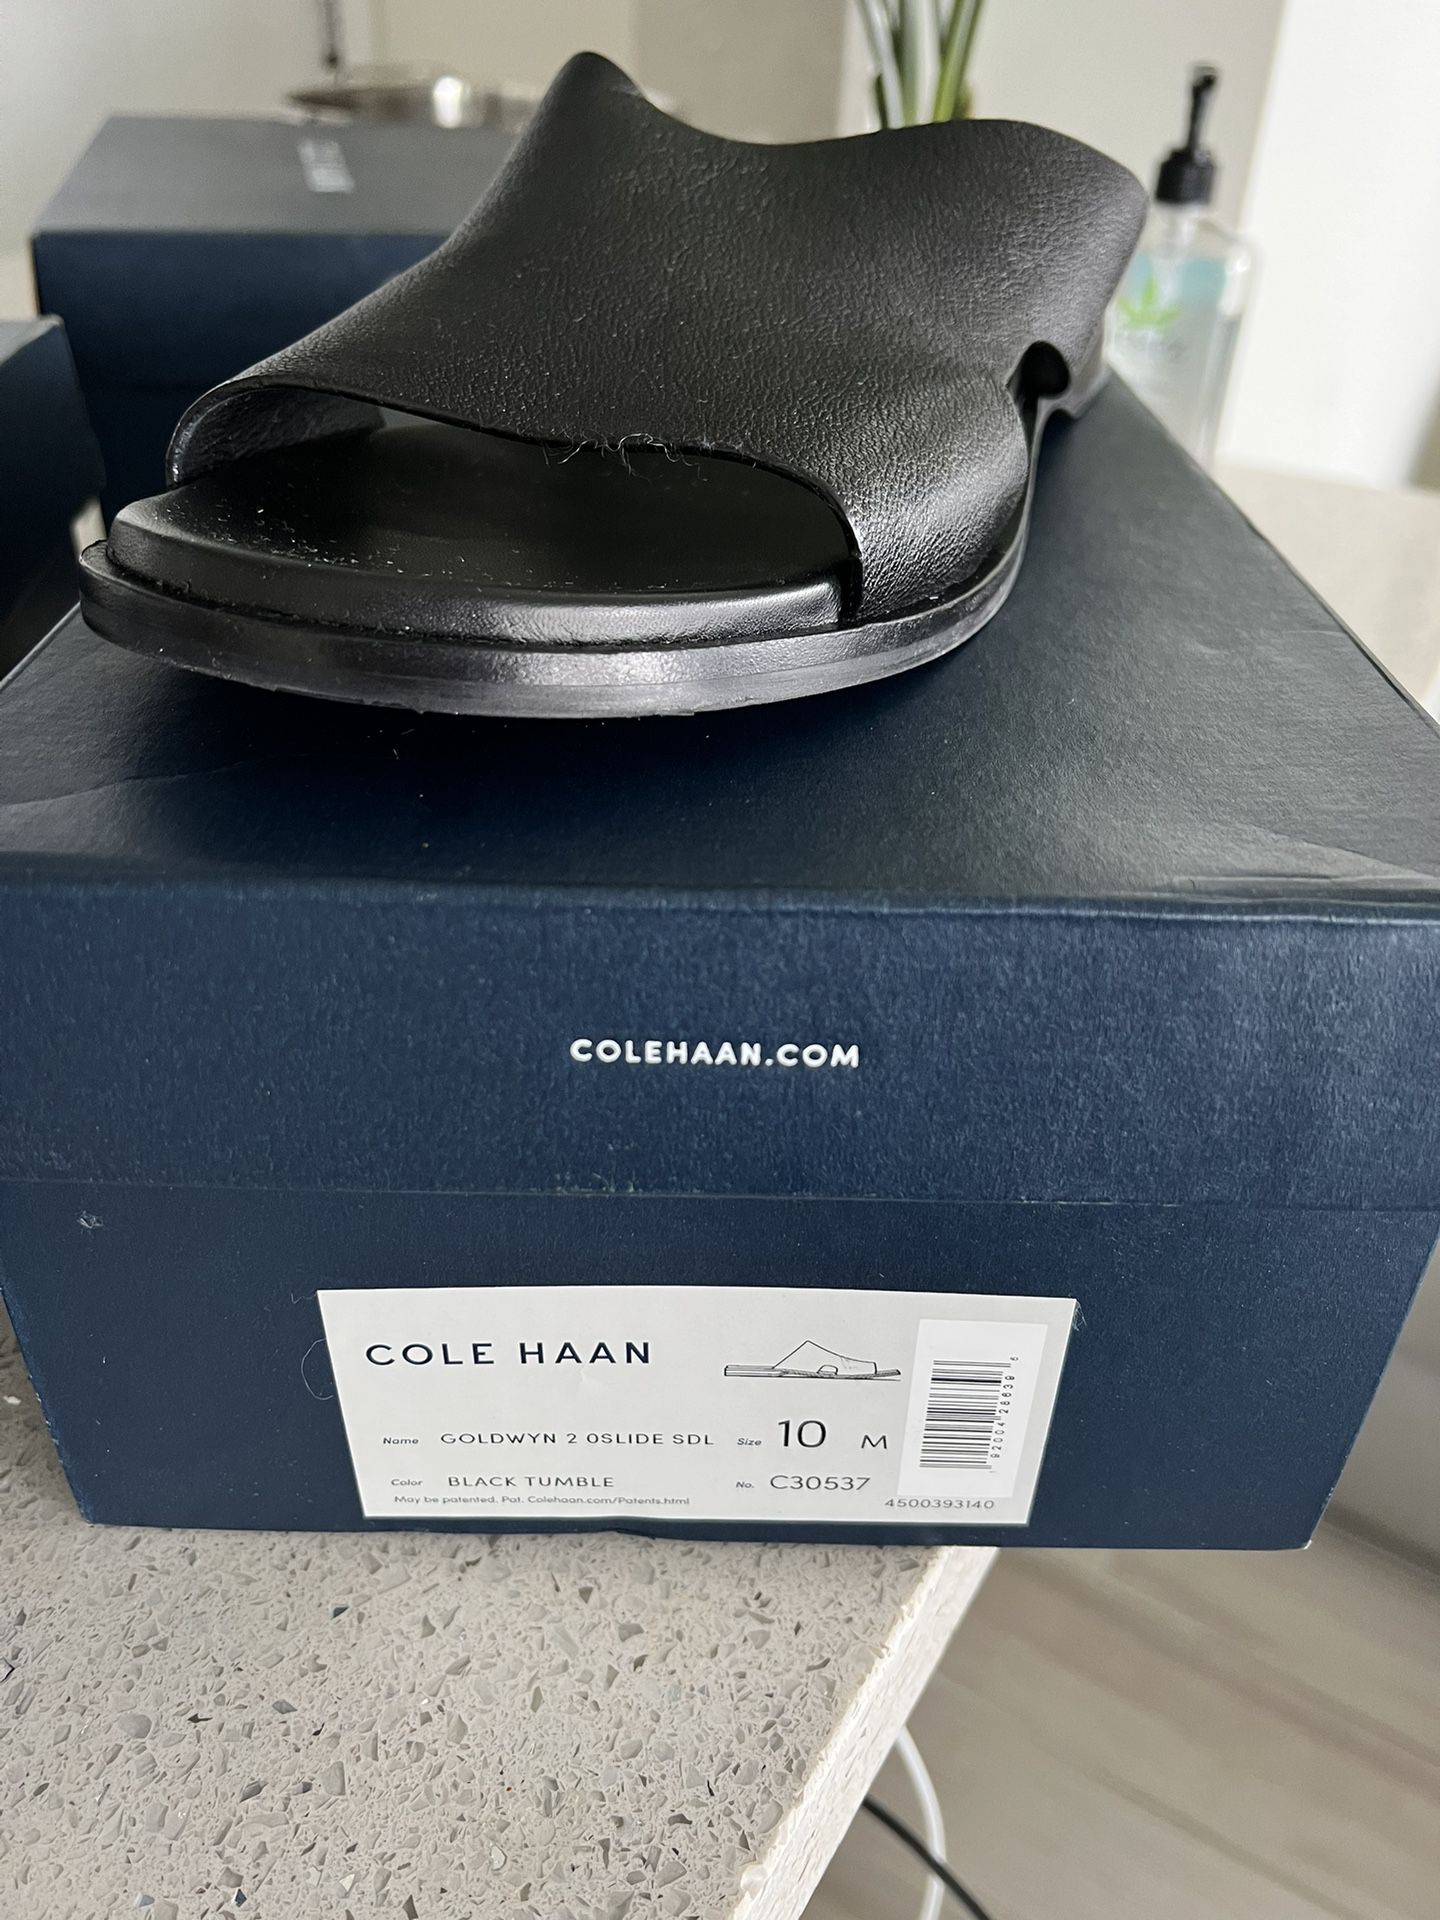 3 Pairs Of Cole Haan Leather Slides Size 9-10. All Come With Boxes Never Worn.